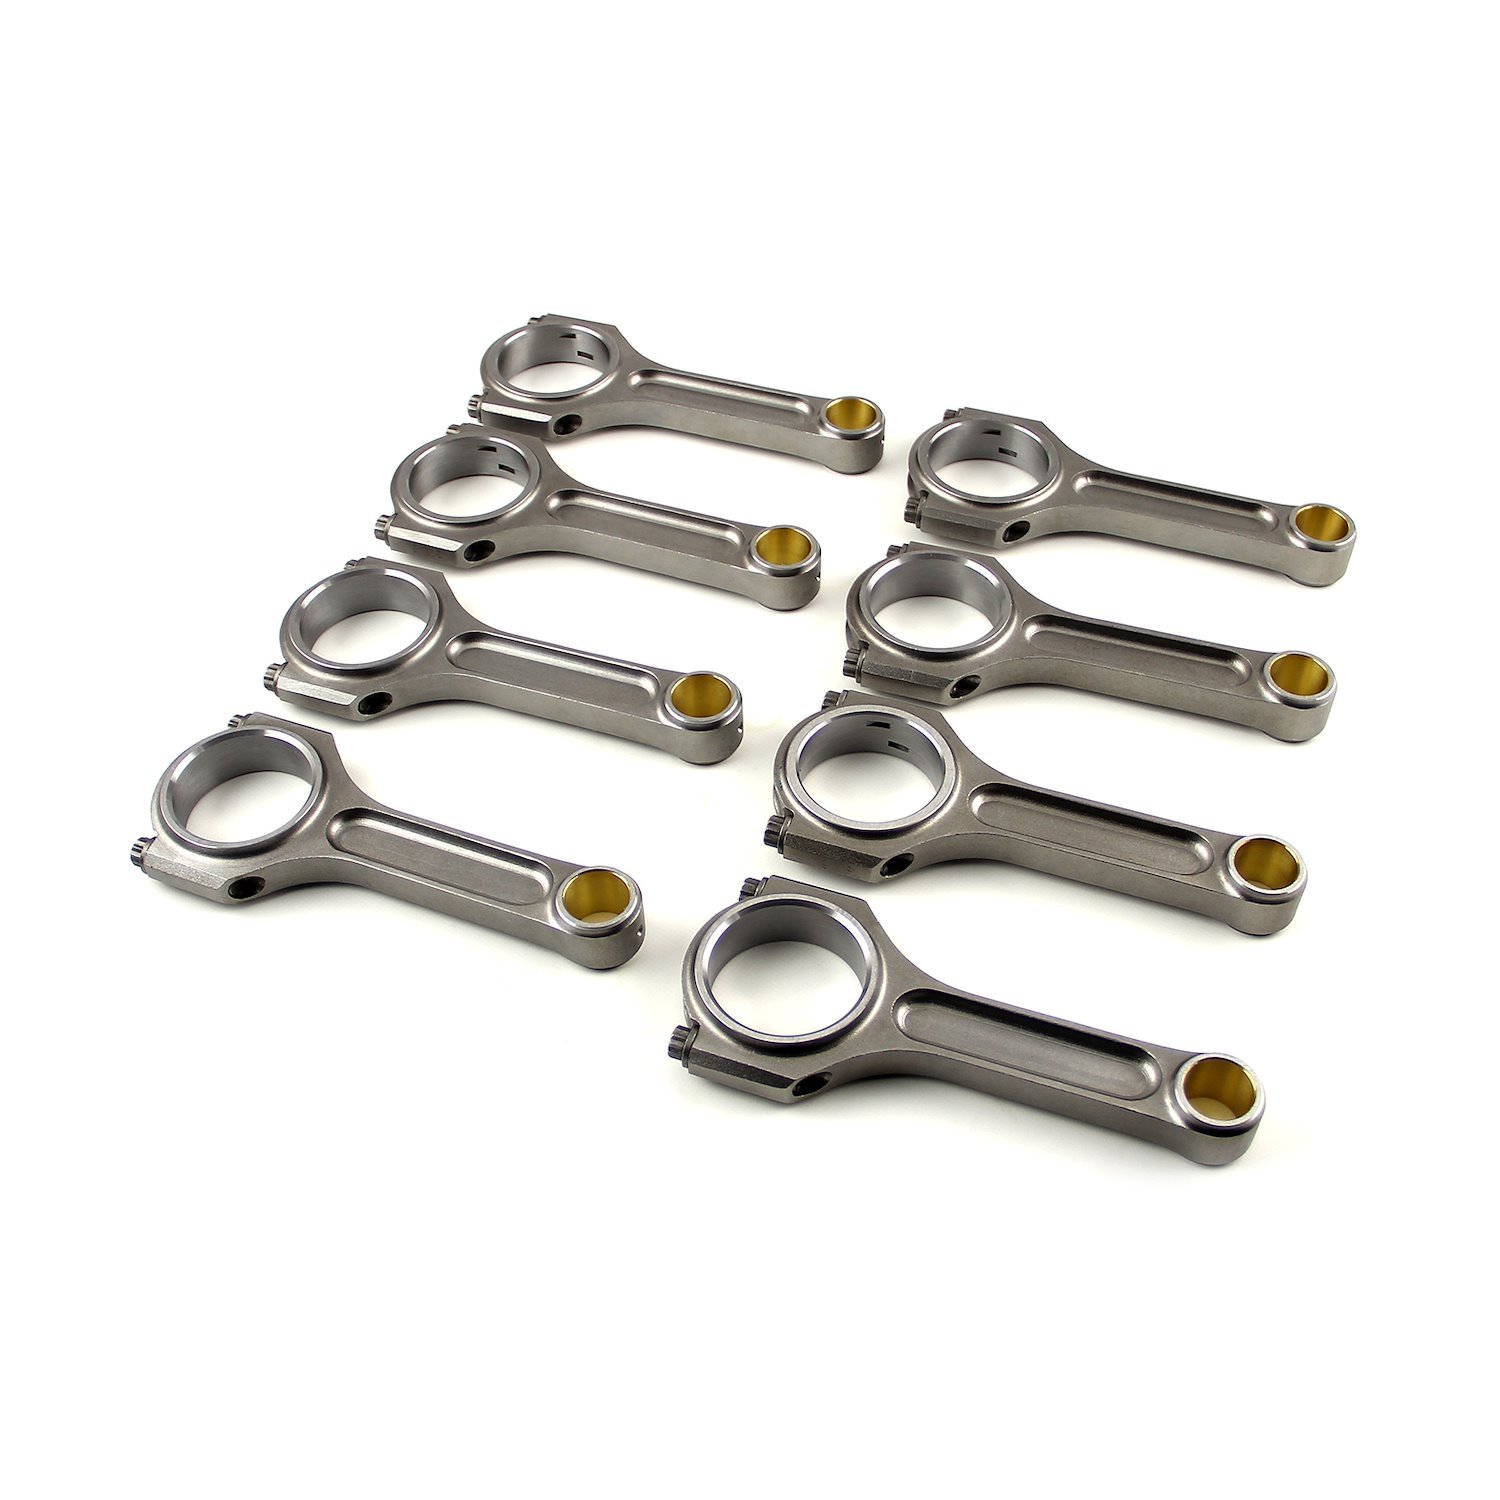 I Beam Race 5.315 2.123 .912 Bronze Bush 4340 Connecting Rods - Ford 302